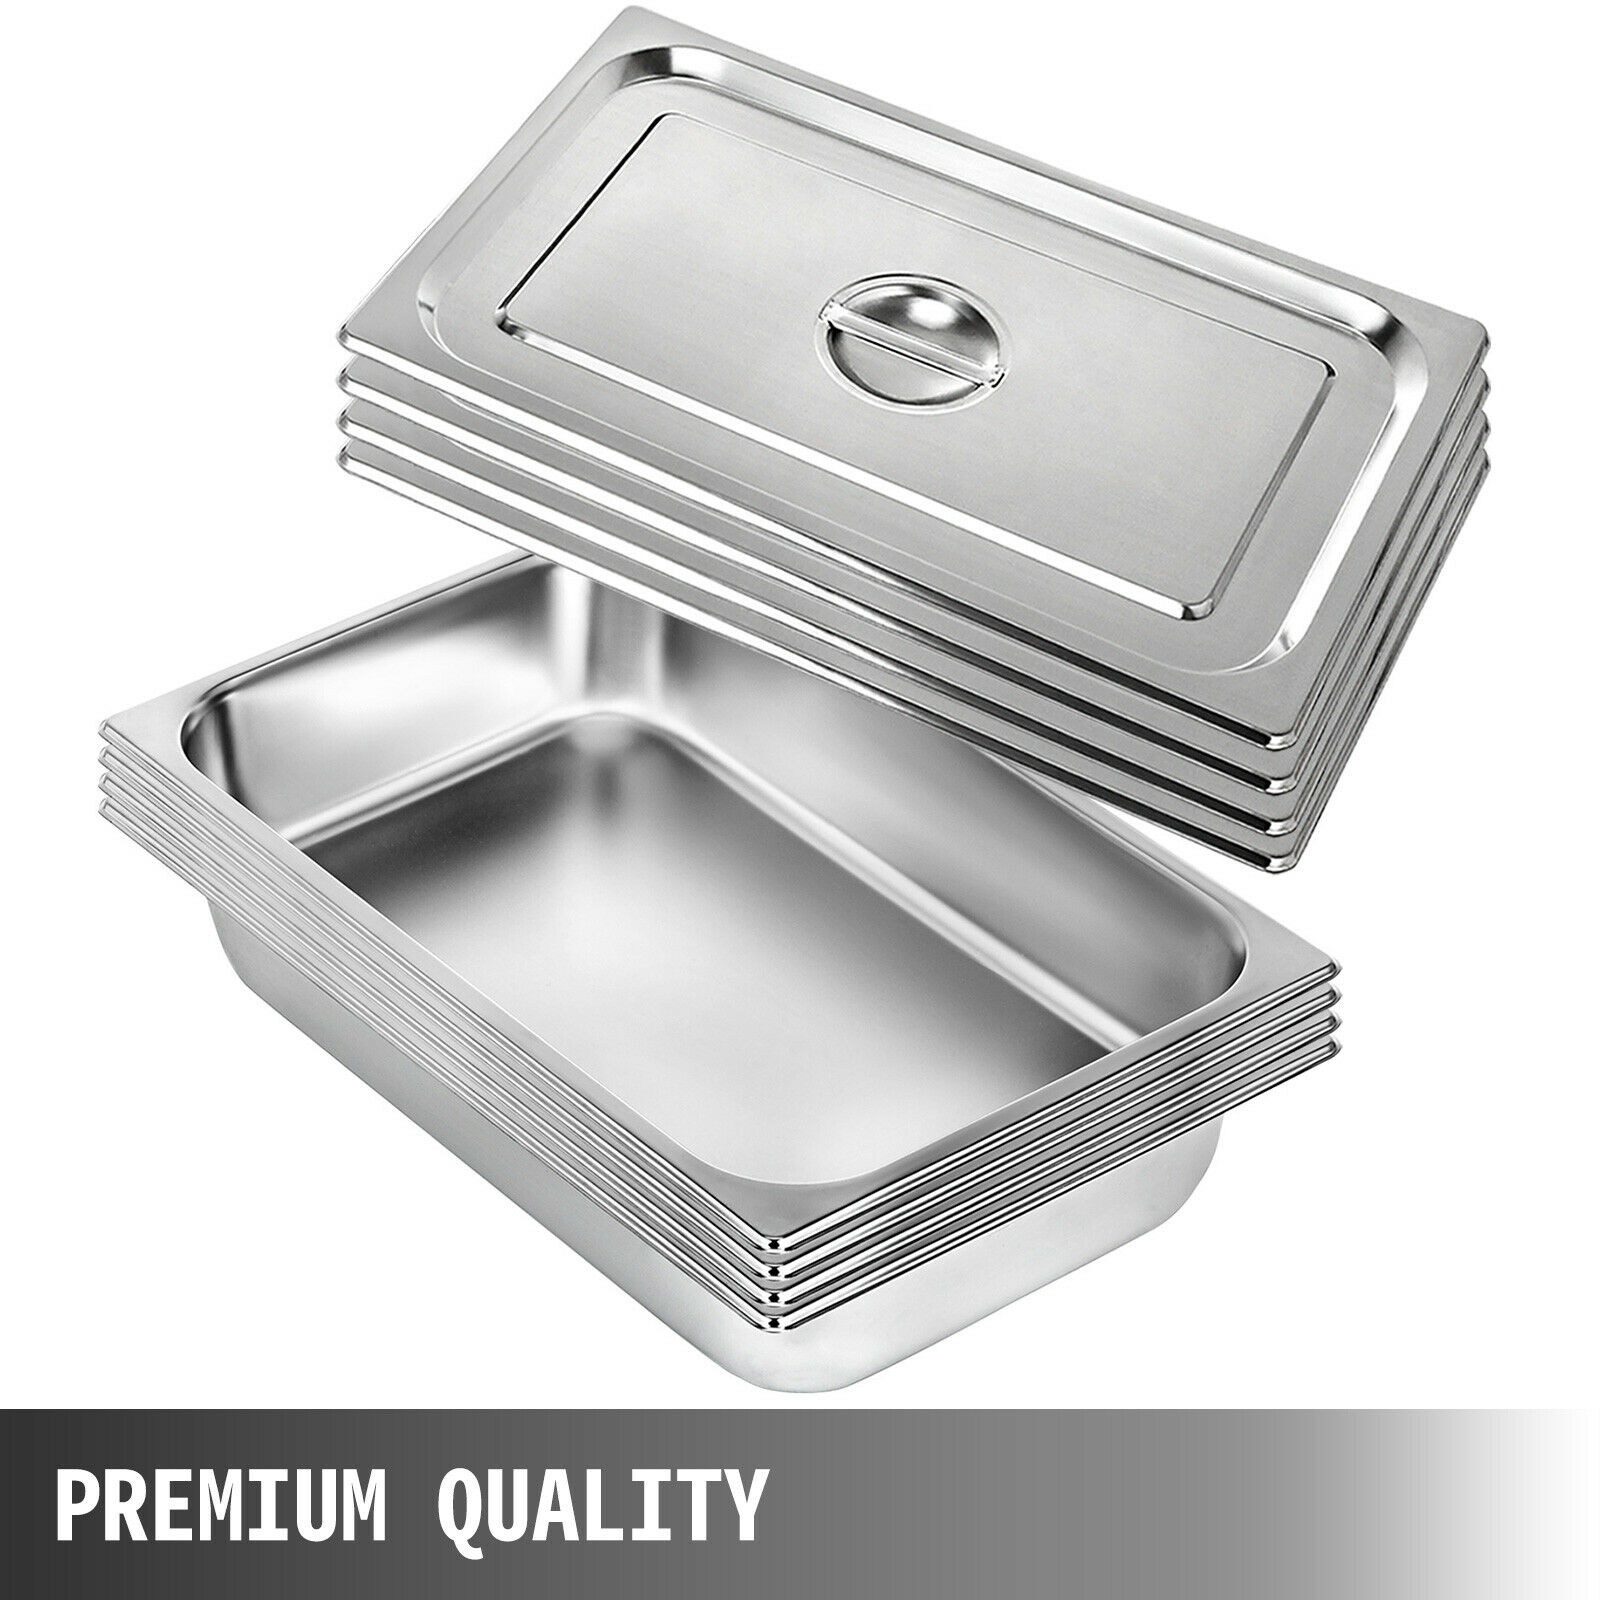 Rectangular Tray Stainless Steel Tray 4 Set Steamed Rice Plate 50 x 30 x 10 cm Stainless Steel Oven Baking Tray Easy to Clean